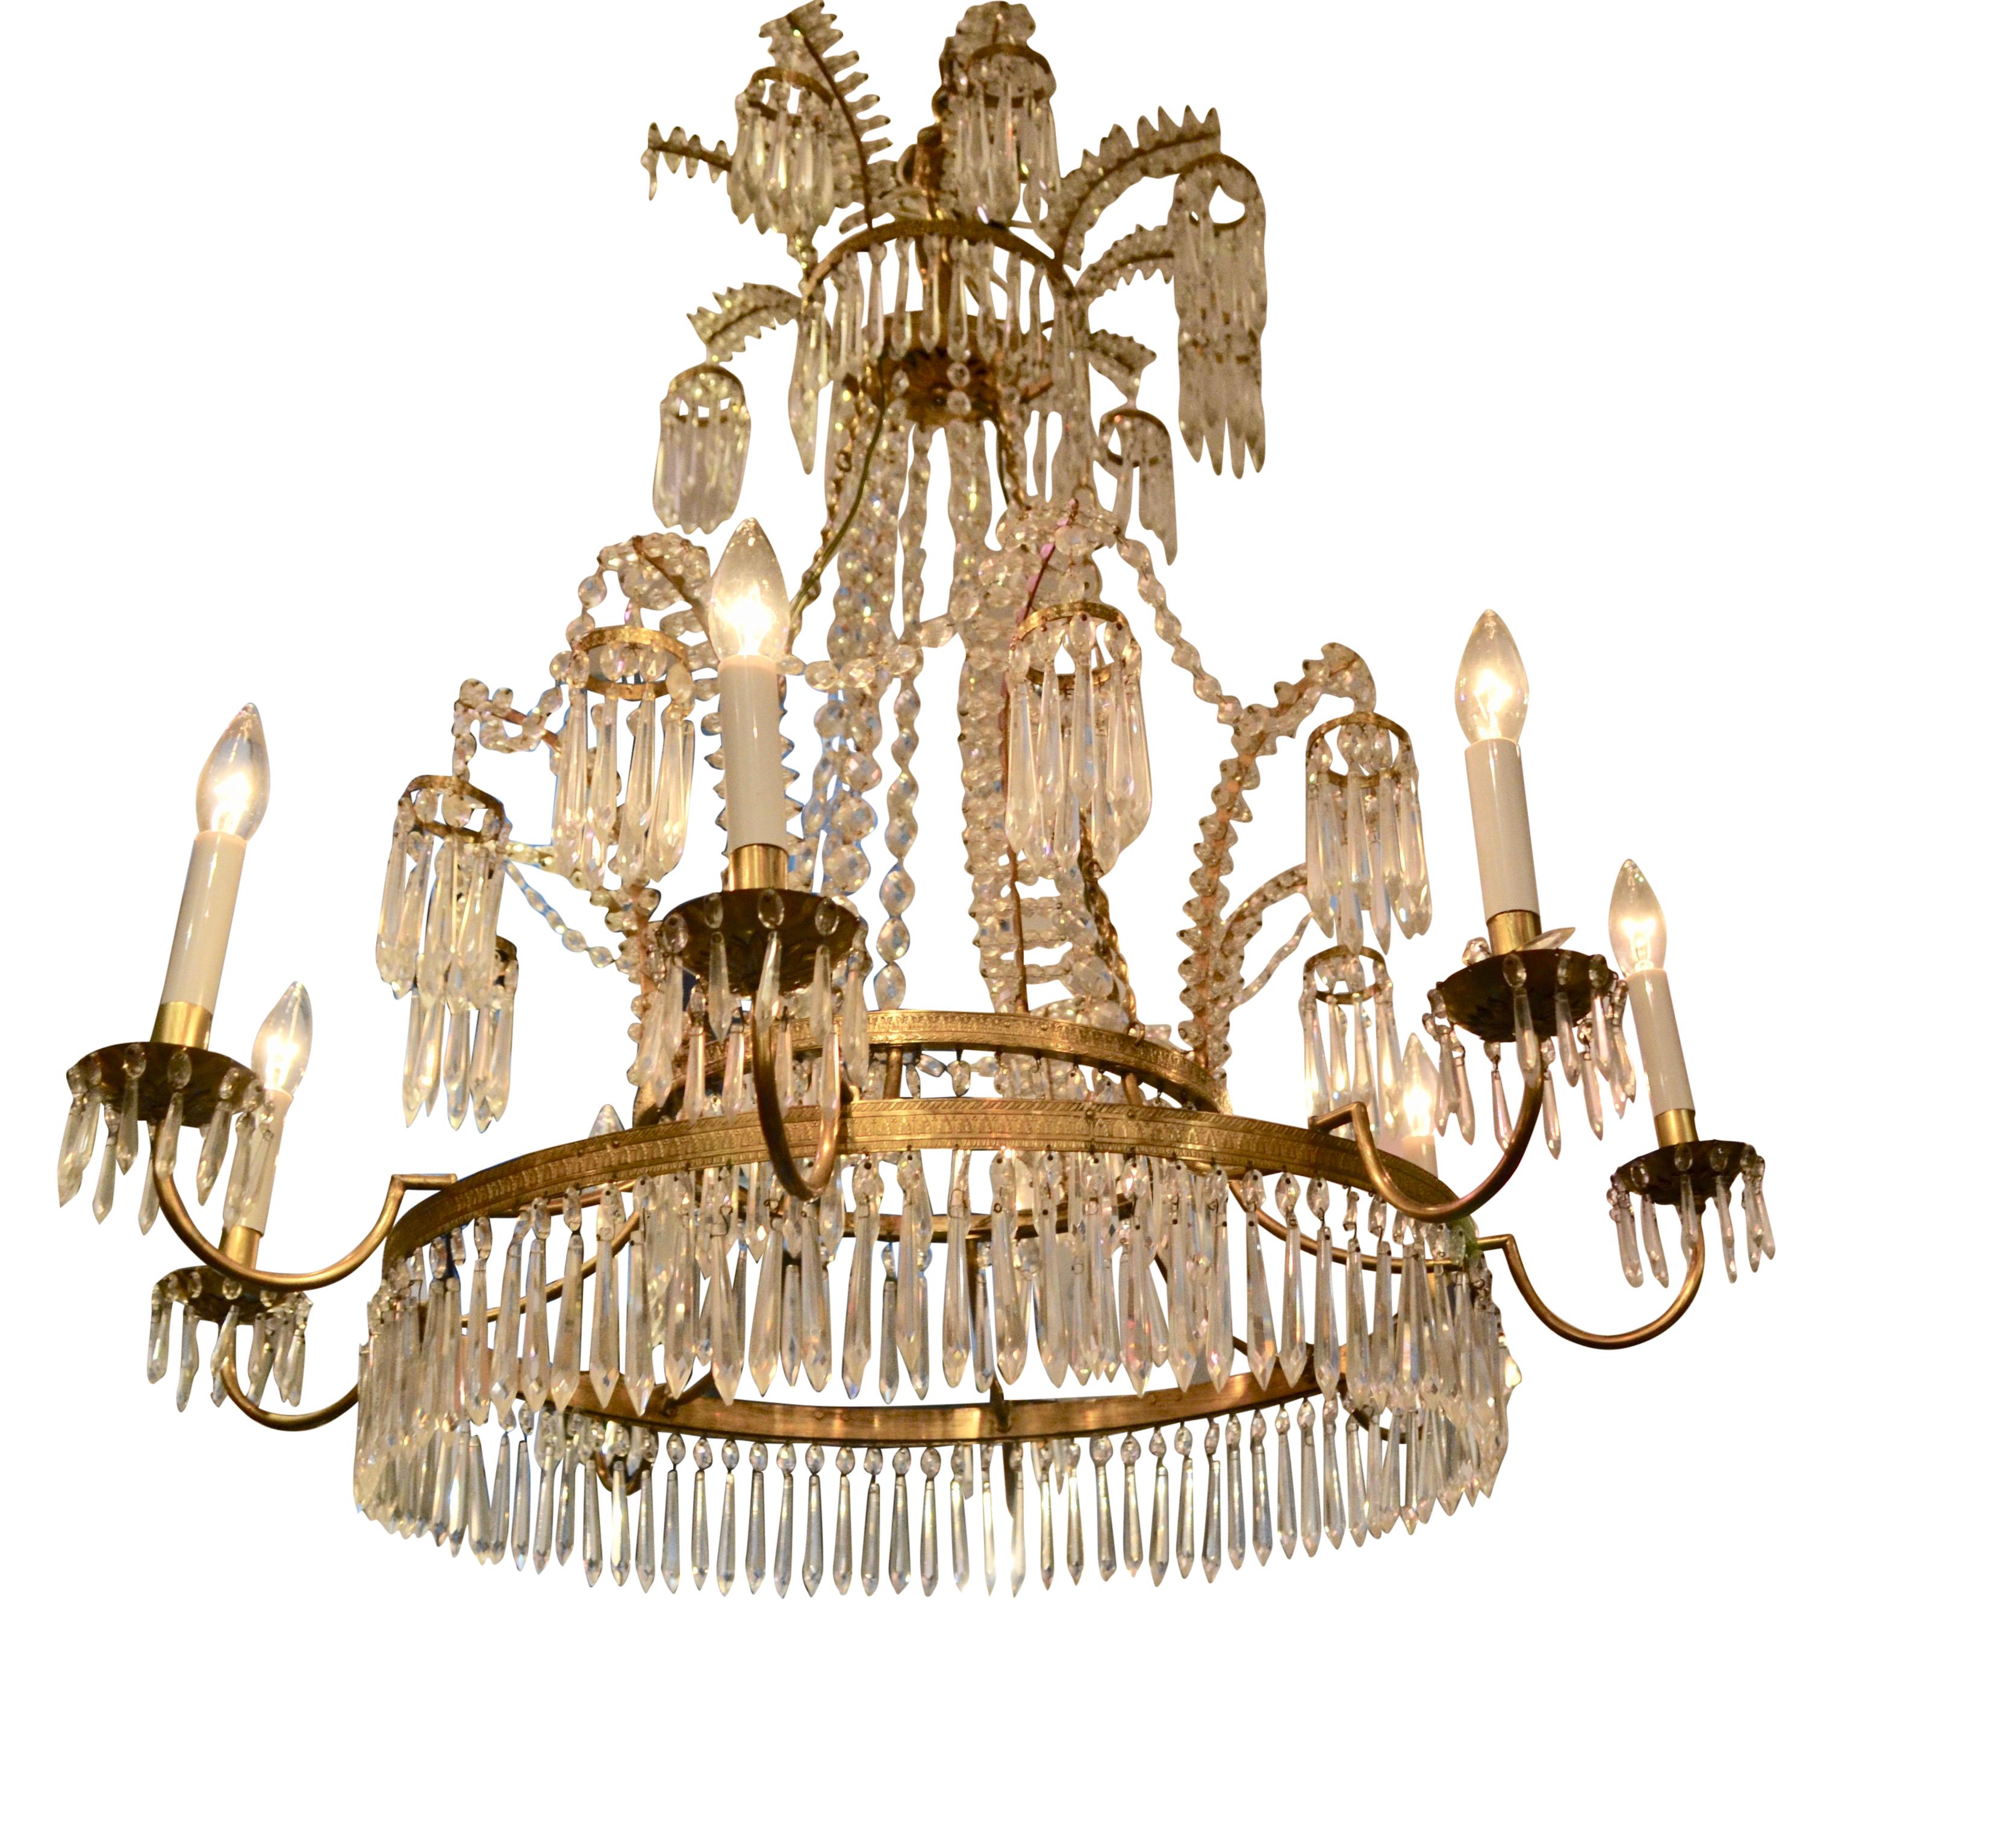 Gilt 19th Century Russian/Baltic Style Chandelier